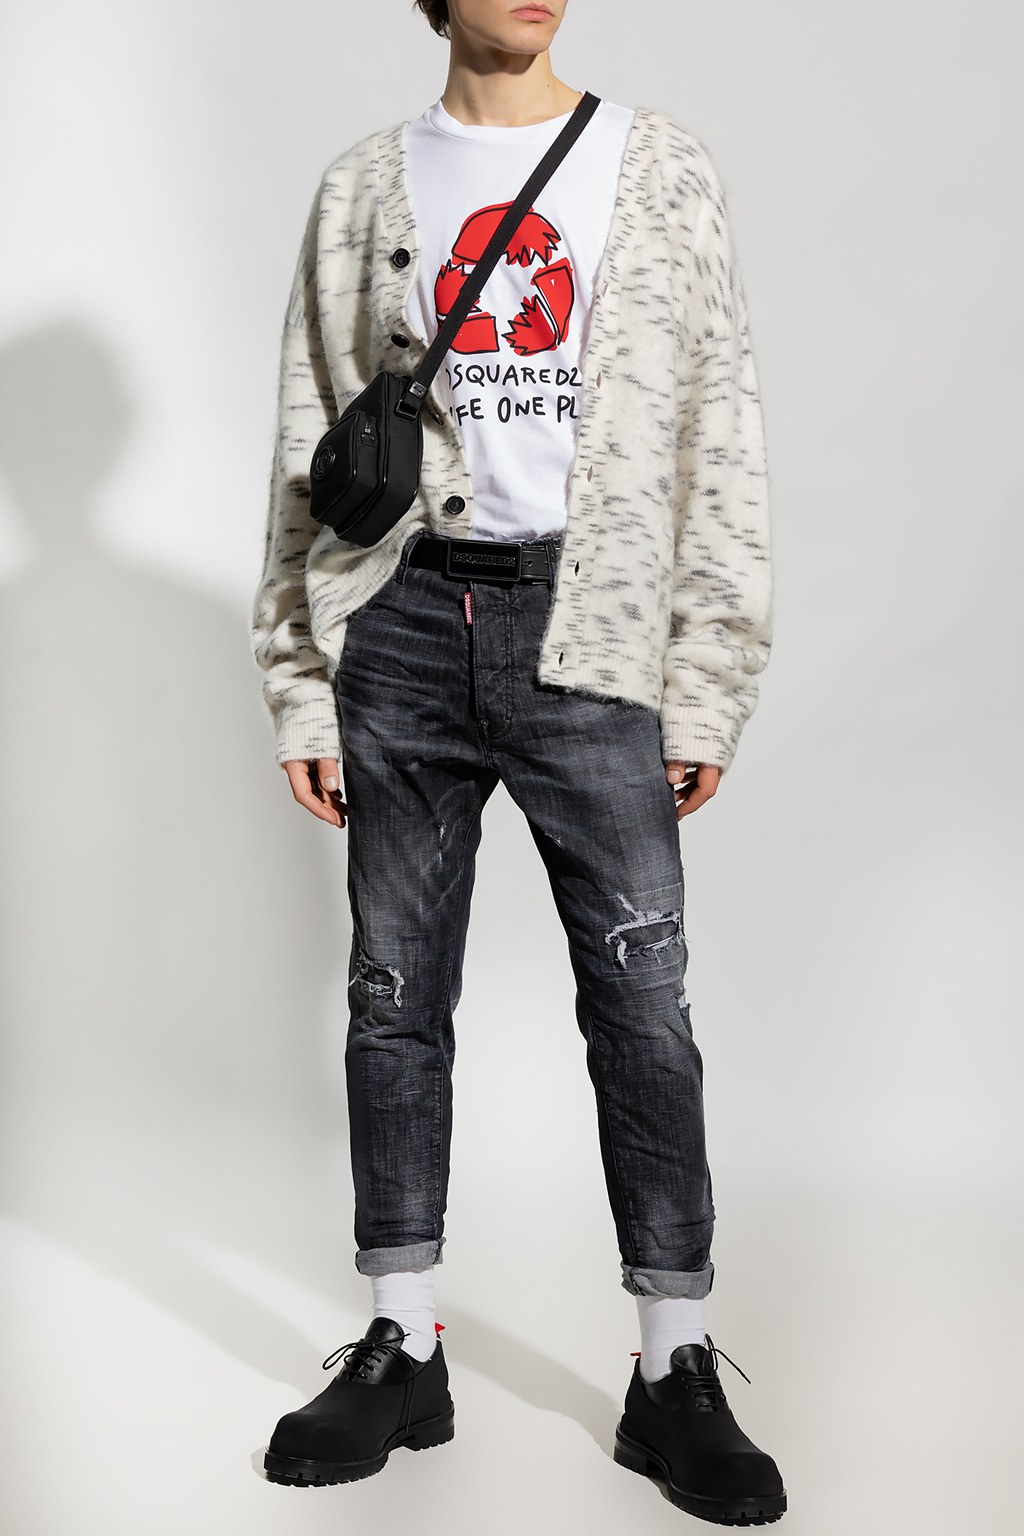 GenesinlifeShops KR - Grey 'Relax Long Crotch' jeans Dsquared2